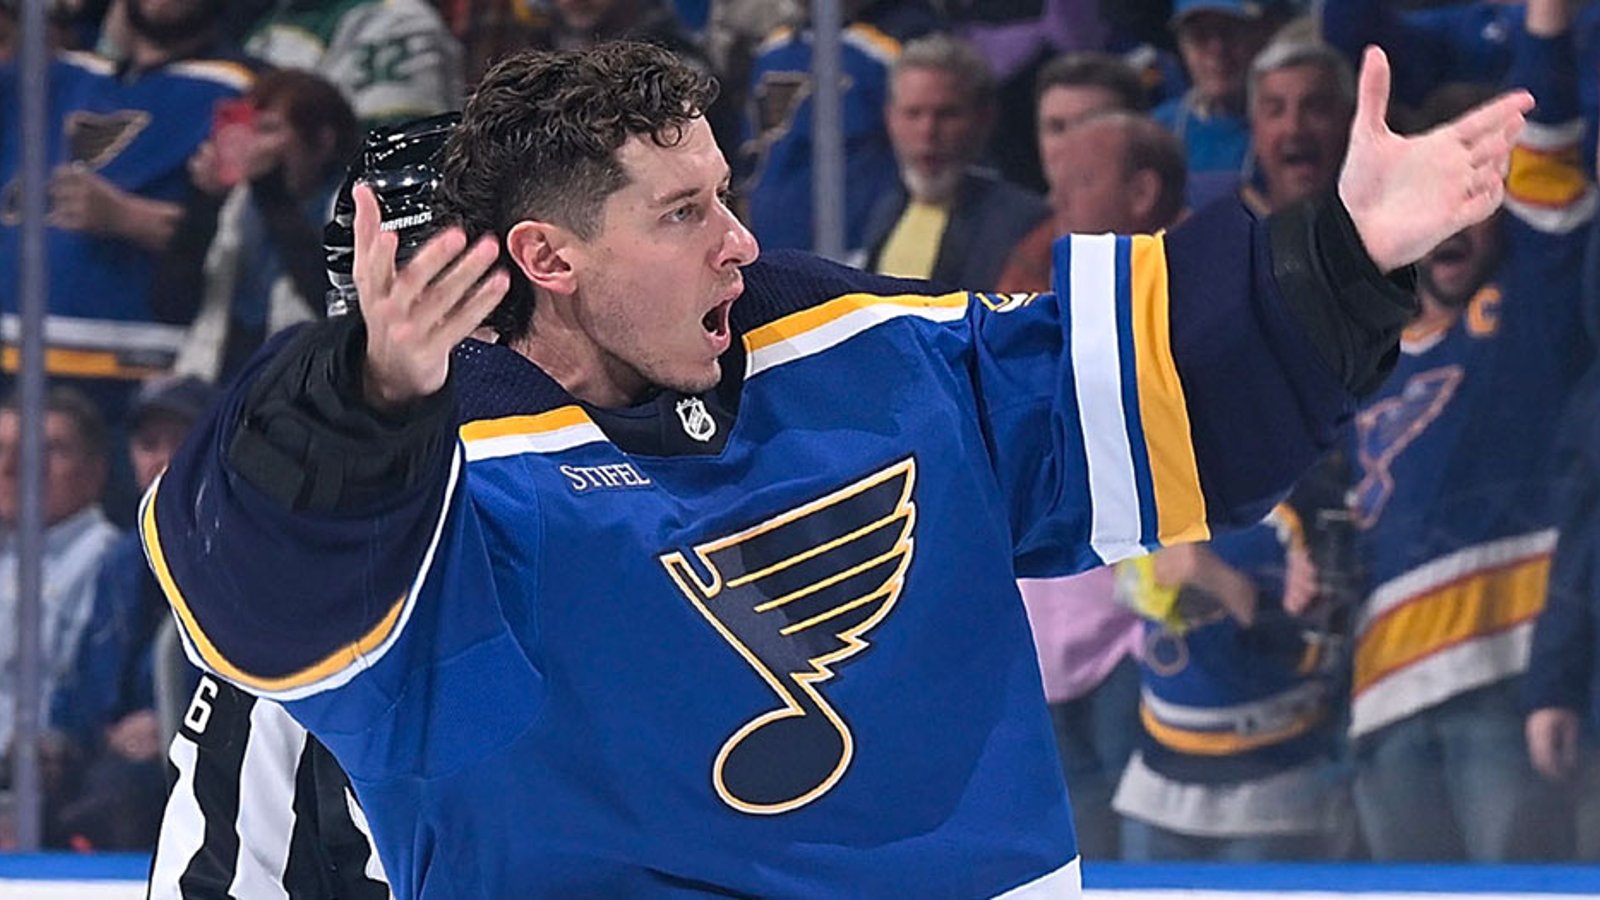 Former NHL enforcer rips Binnington for “playing the tough guy” role